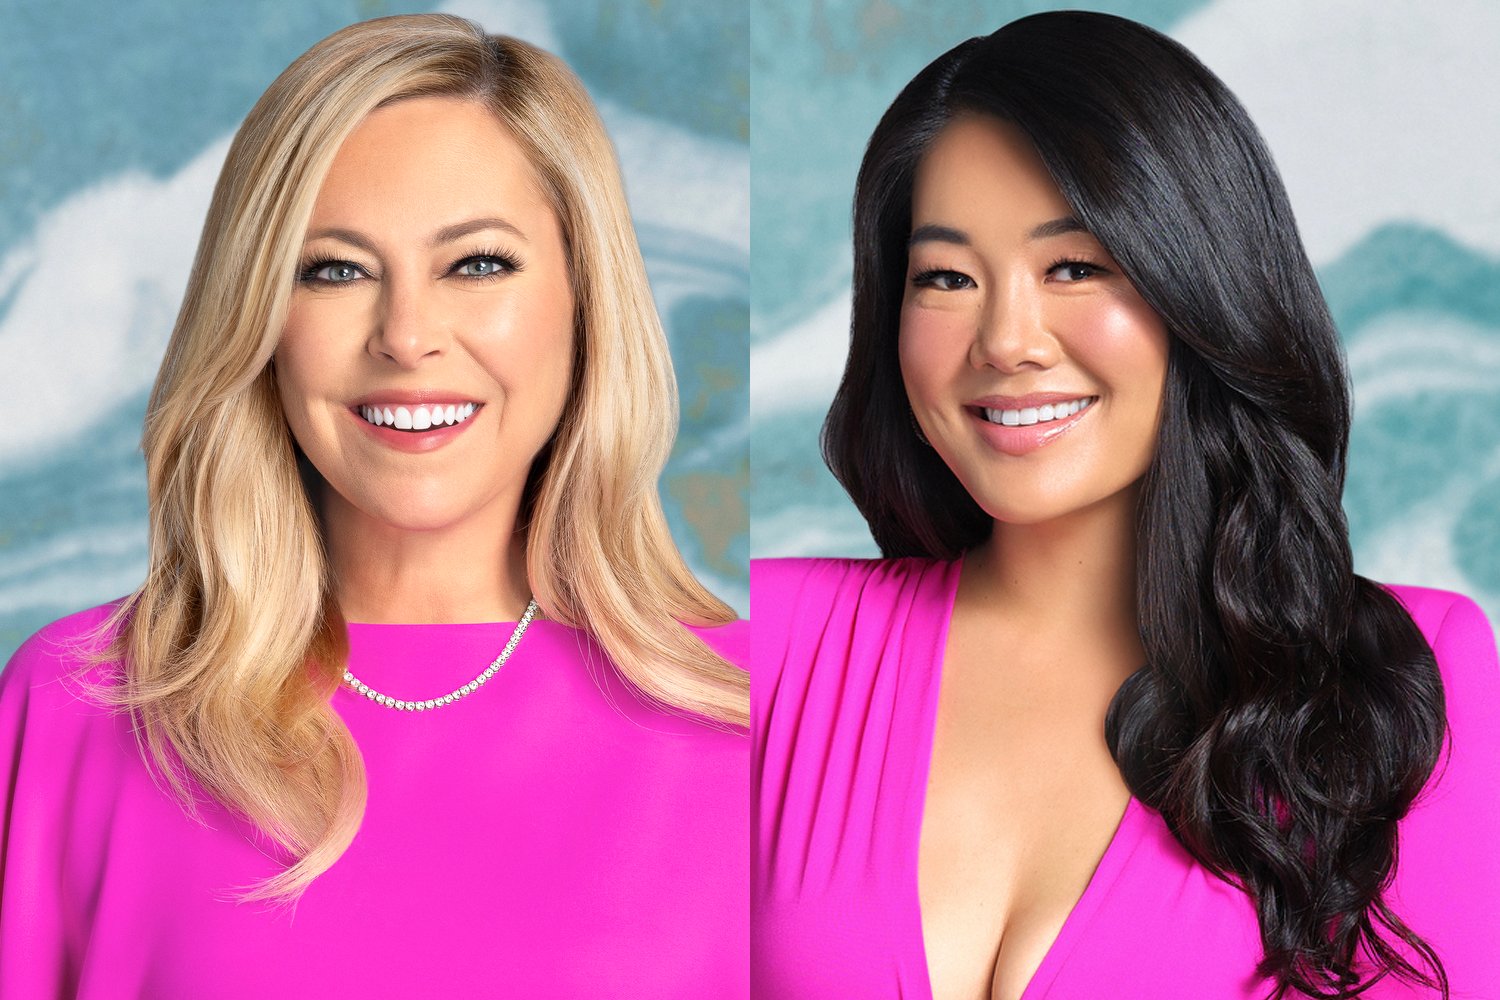 Sutton Stracke and Crystal Kung Minkoff in their 'RHOBH' Season 11 official portraits